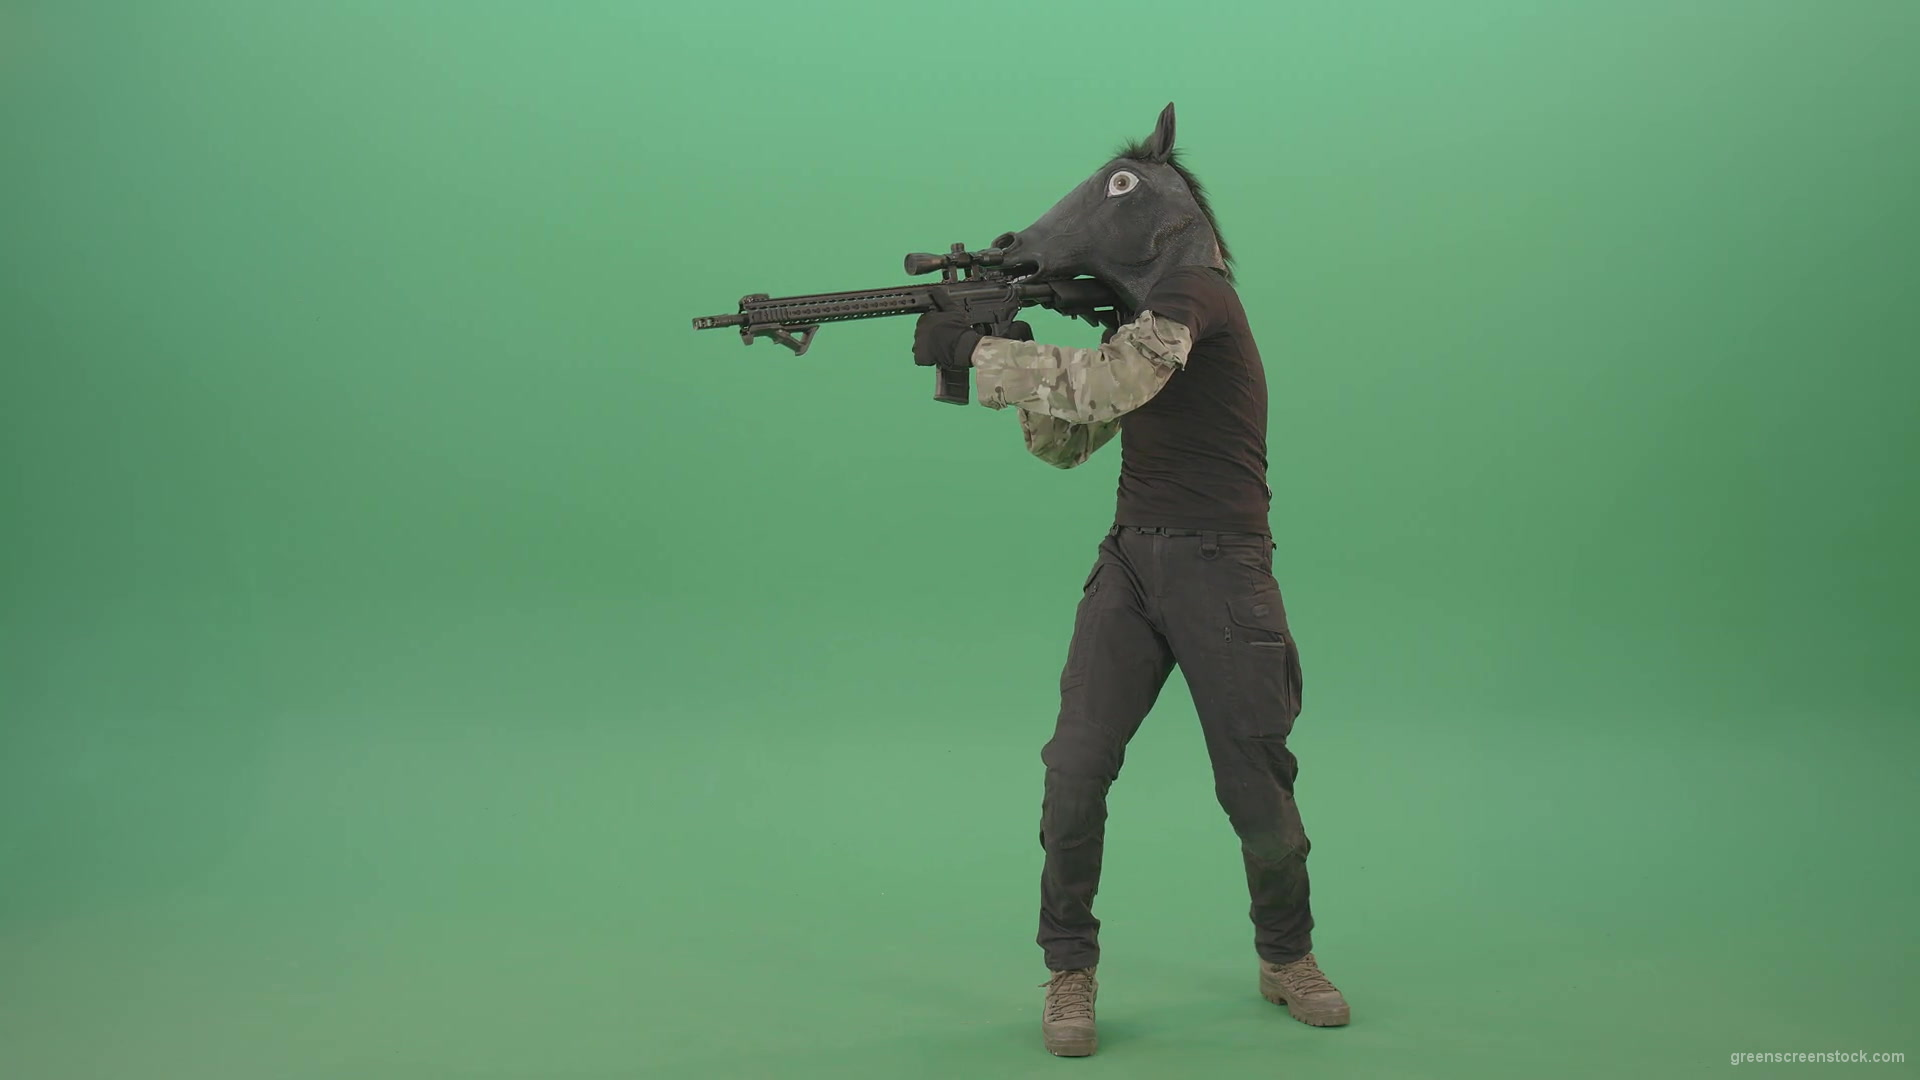 Front-view-Army-Man-in-horse-mask-shooting-from-Machine-Gun-isolated-on-Chromakey-Green-Screen-4K-Video-Footage-1920_009 Green Screen Stock